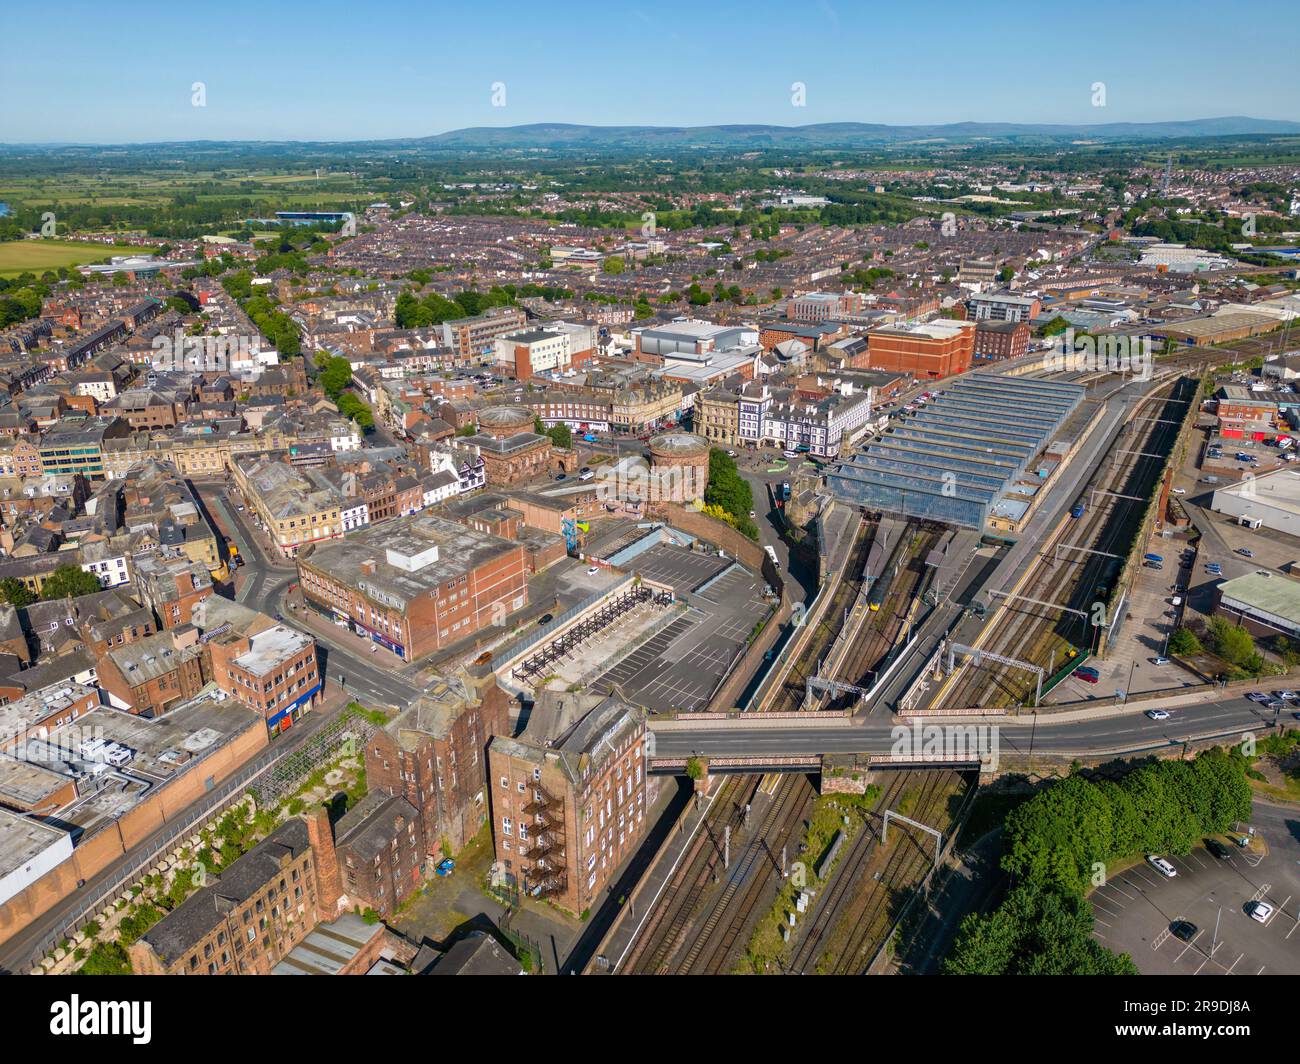 An aerial drone photo of the town center of Carlisle and the large train station with railways. Stock Photo